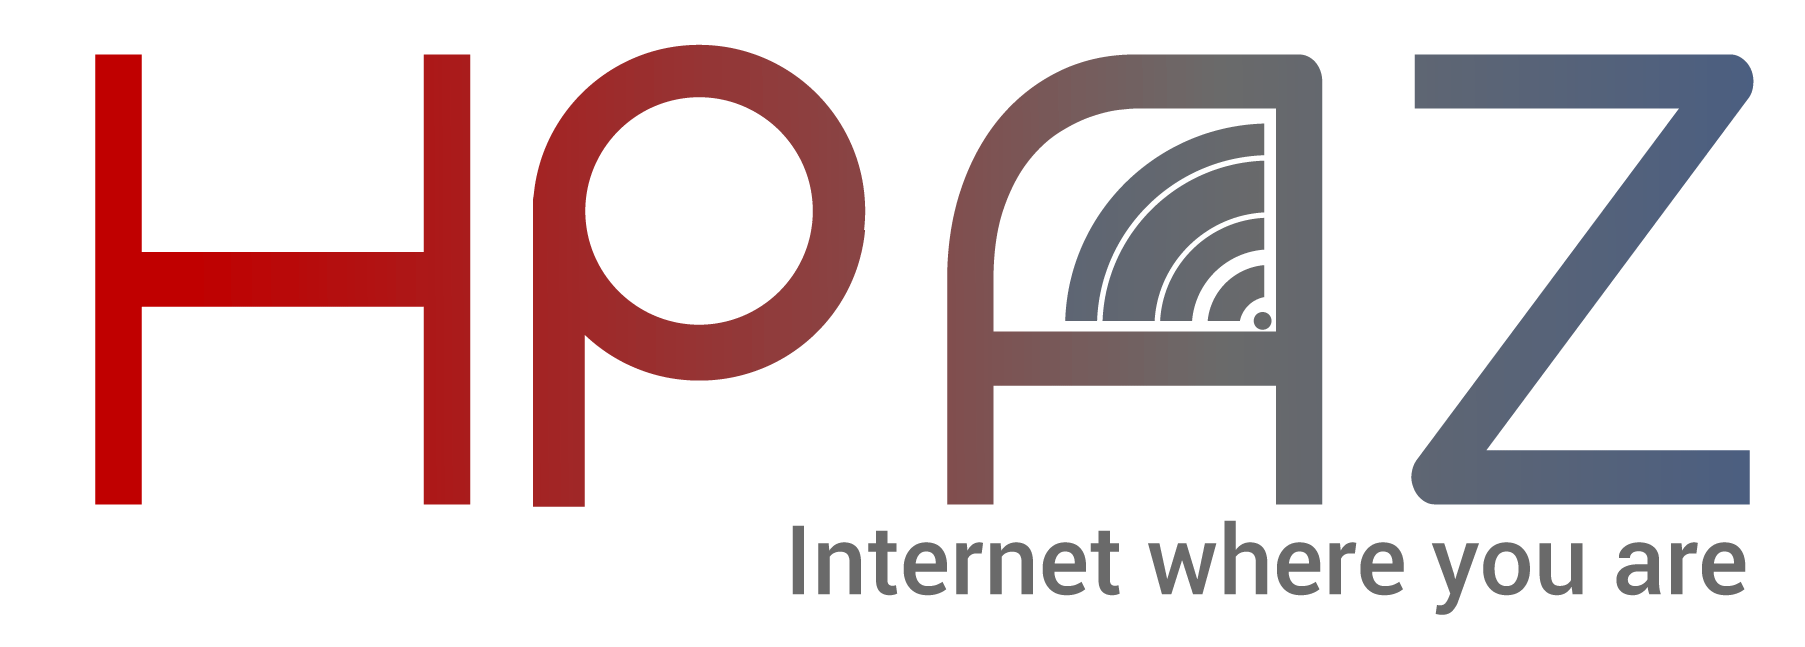 HPAZ Internet Where You Are